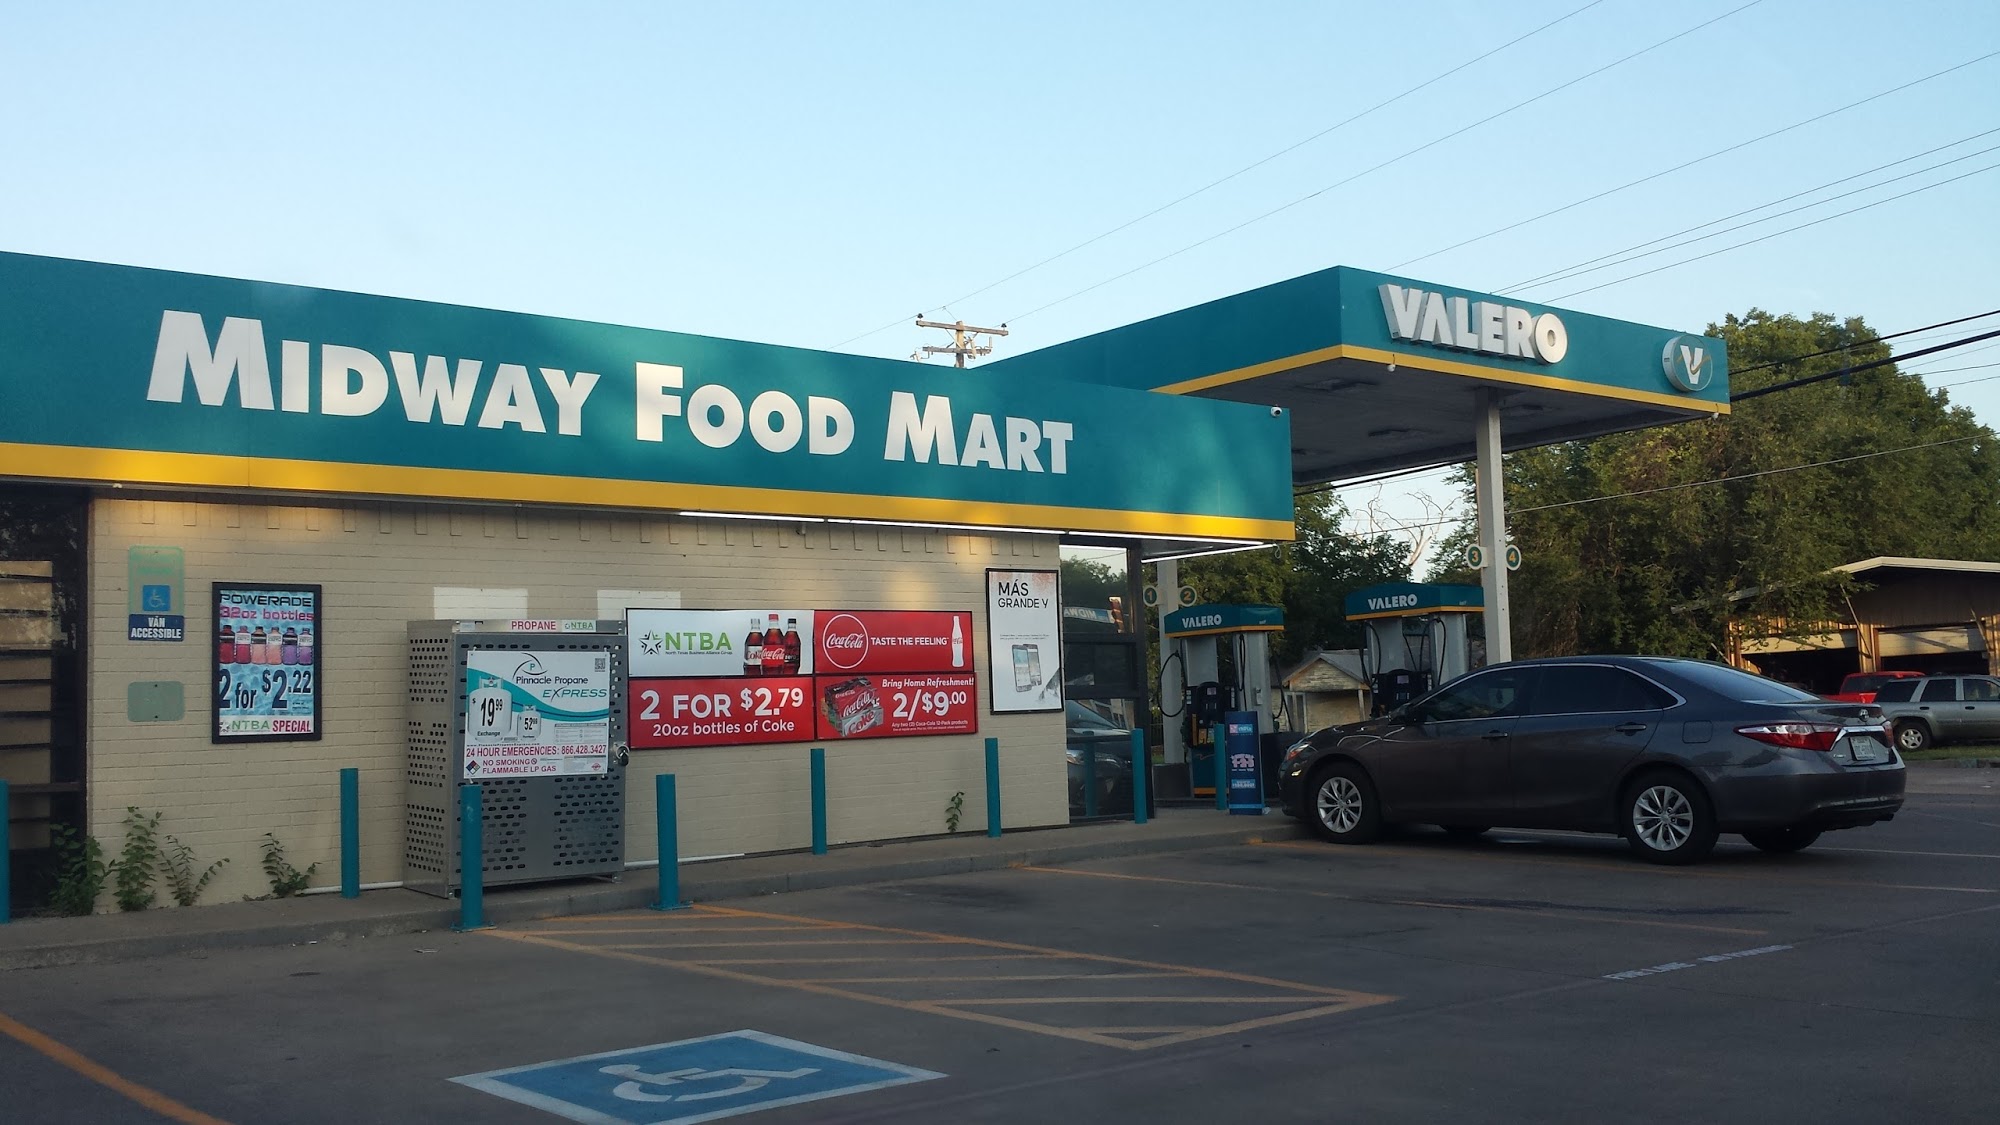 Midway Food Mart